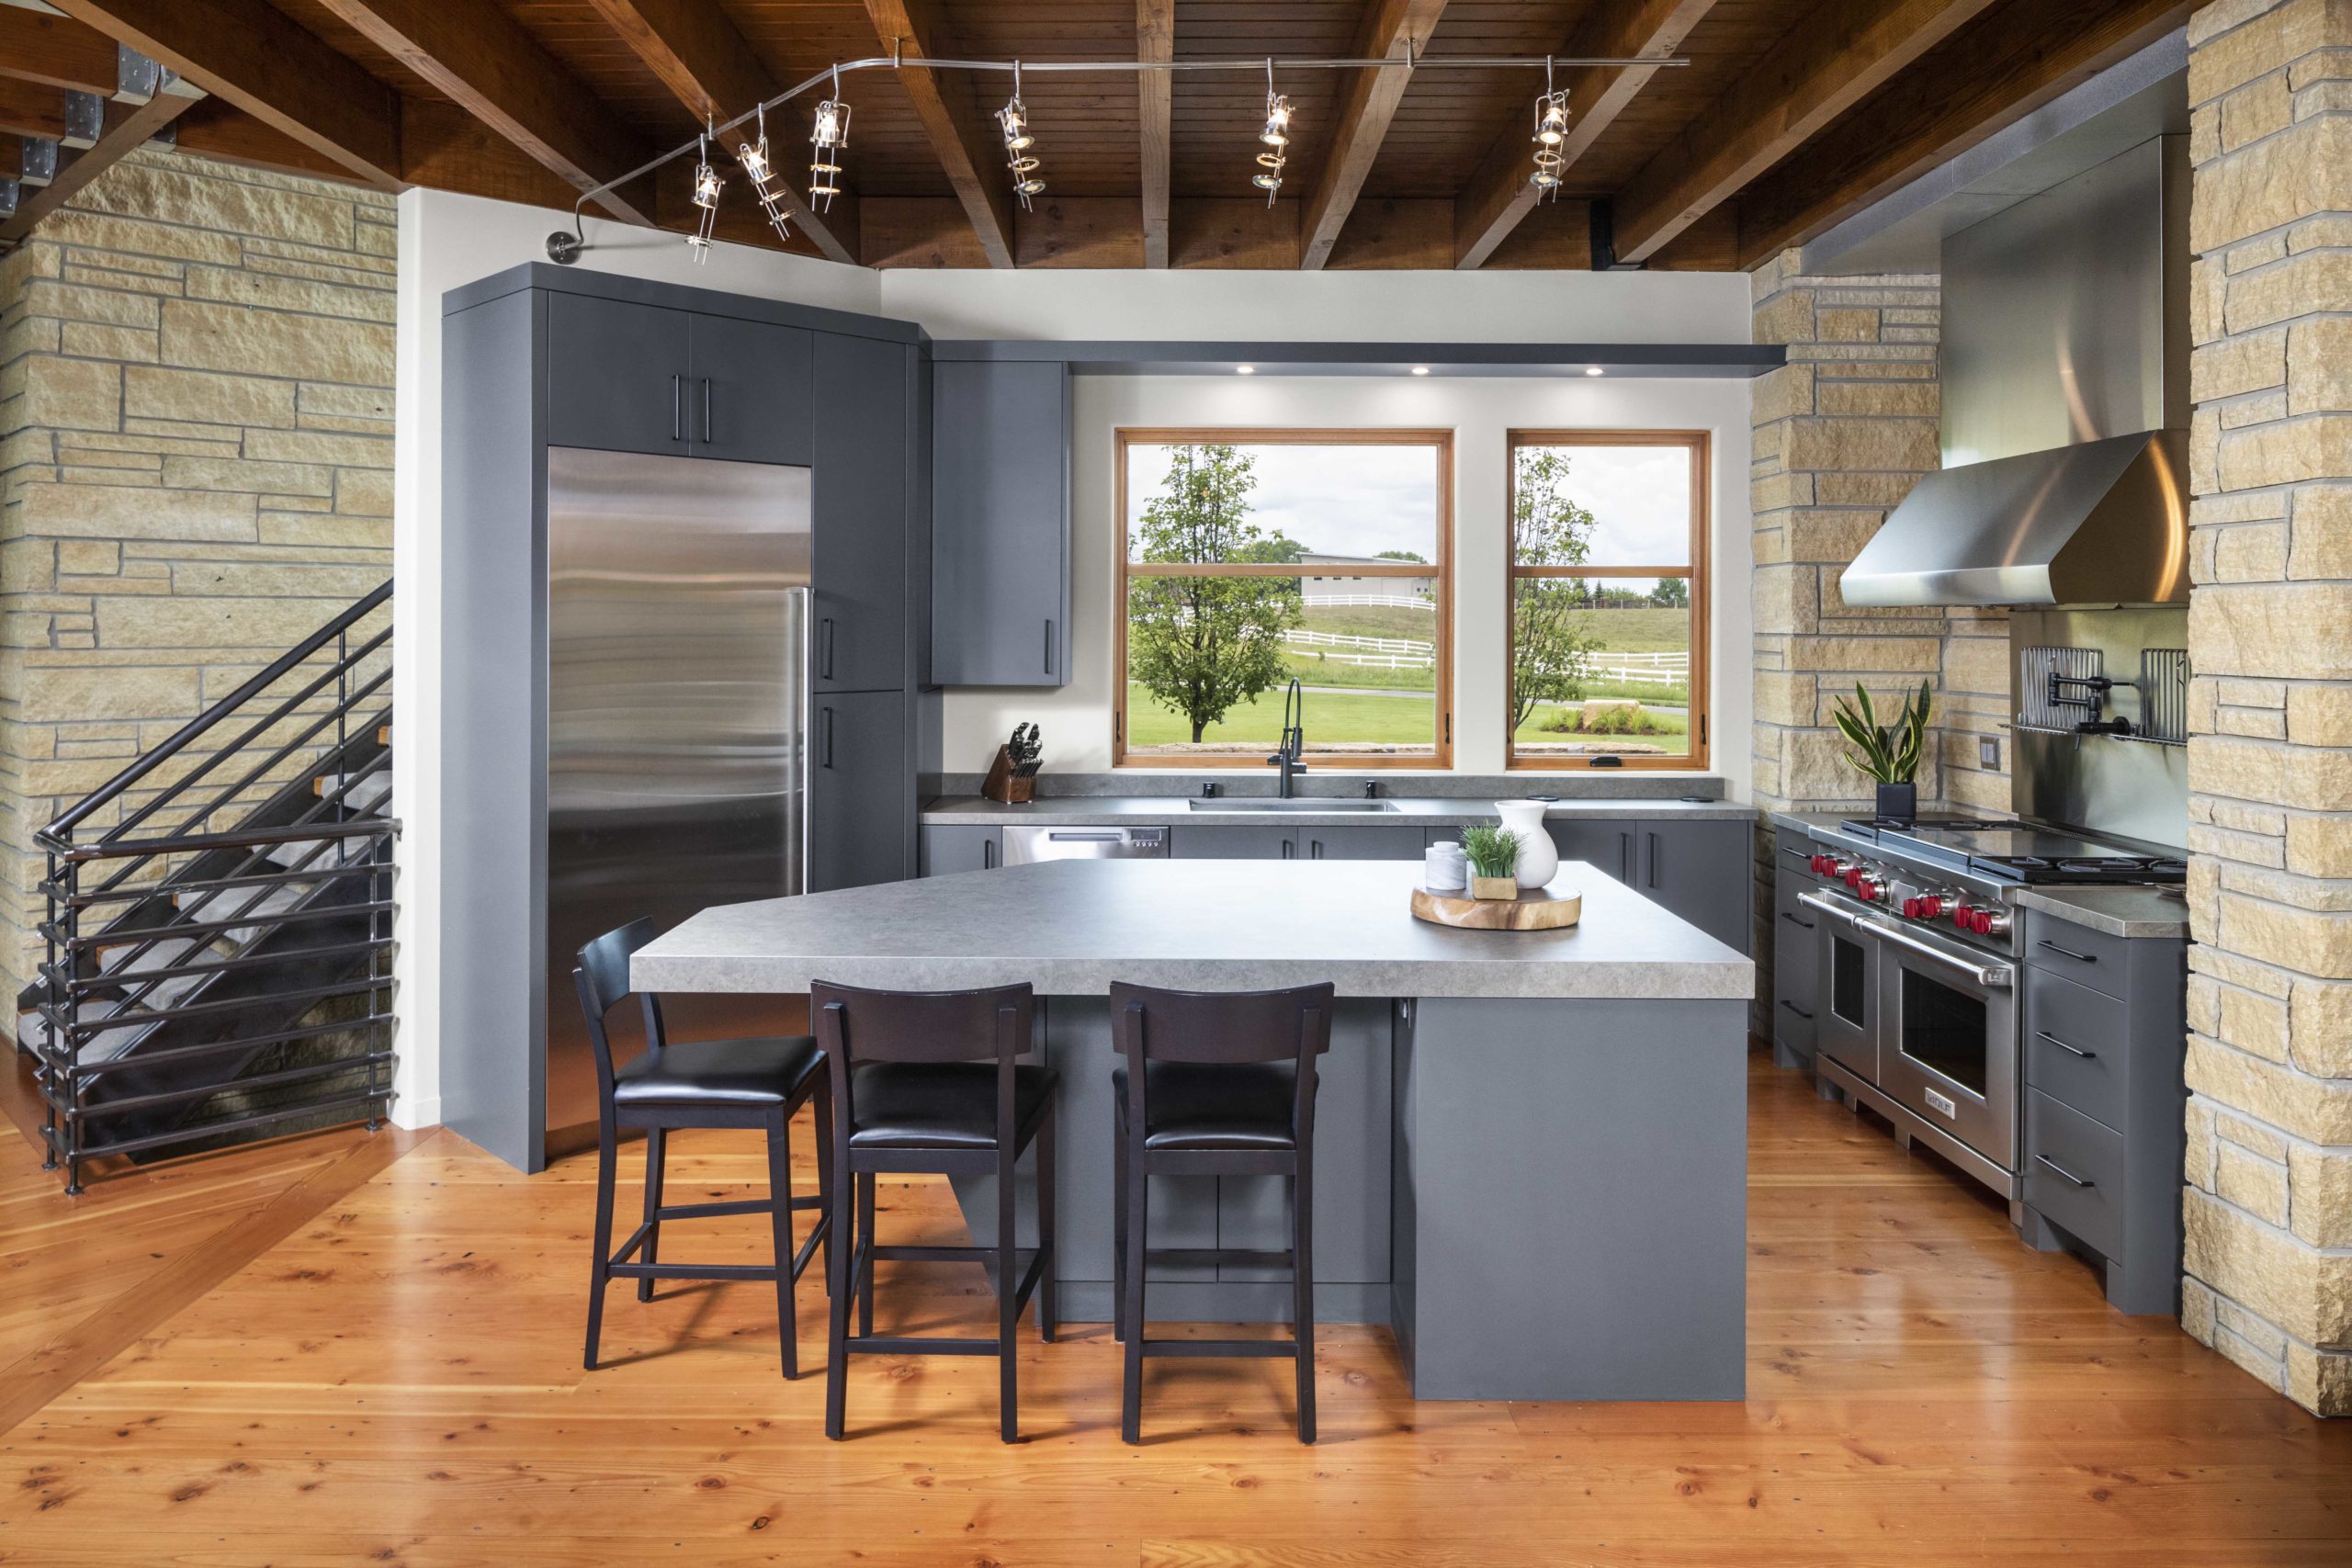 In this contemporary farmhouse kitchen, you will find sleek wood floors and a spacious center island.